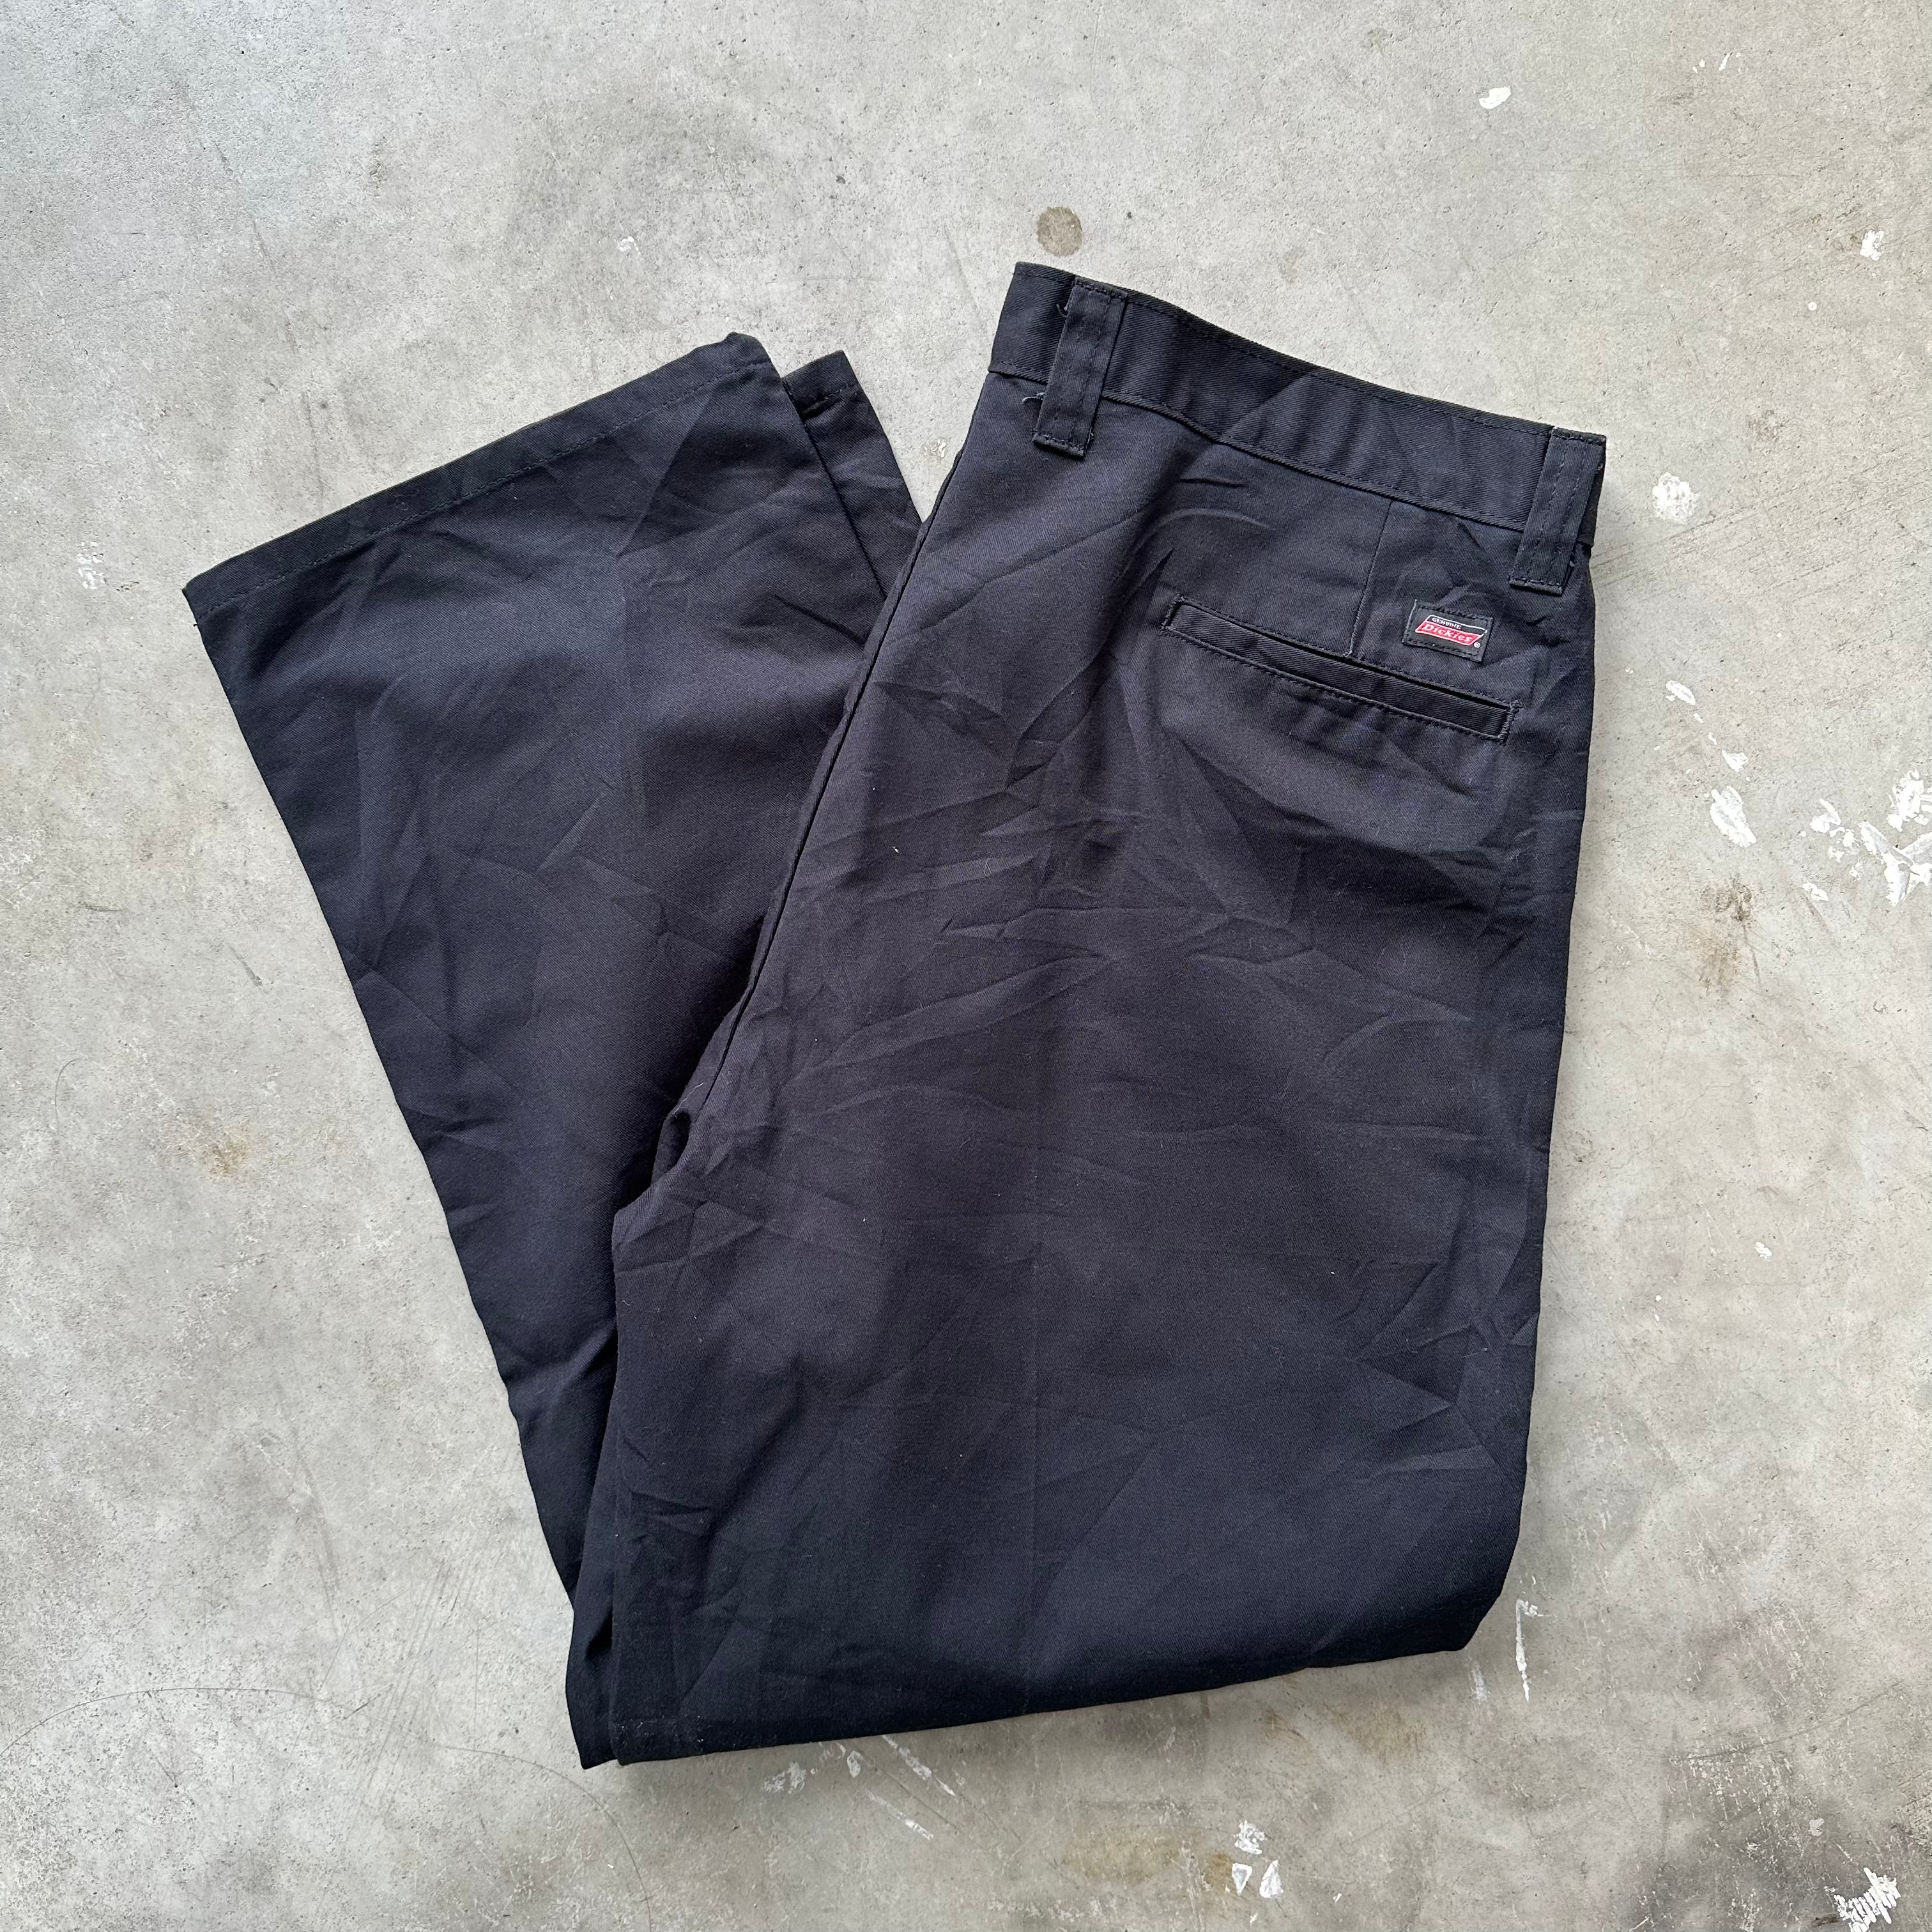 Dickies 874 Original Fit Black Pant 38 x 30 – Curated by Charbel